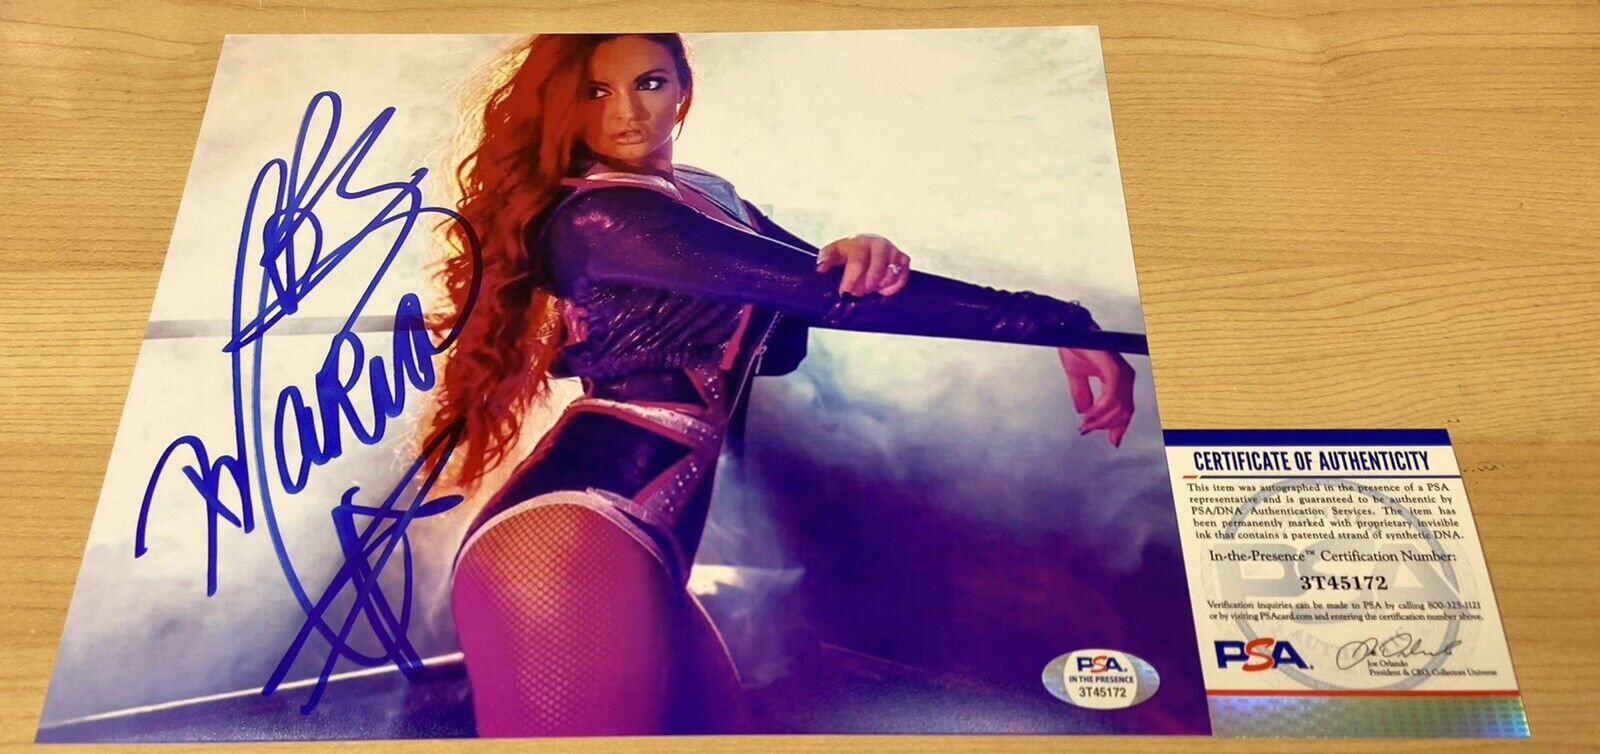 Maria Kanellis WWE ROH Hot Autographed Signed 8X10 Photo Poster painting PSA/DNA Witnessed COA